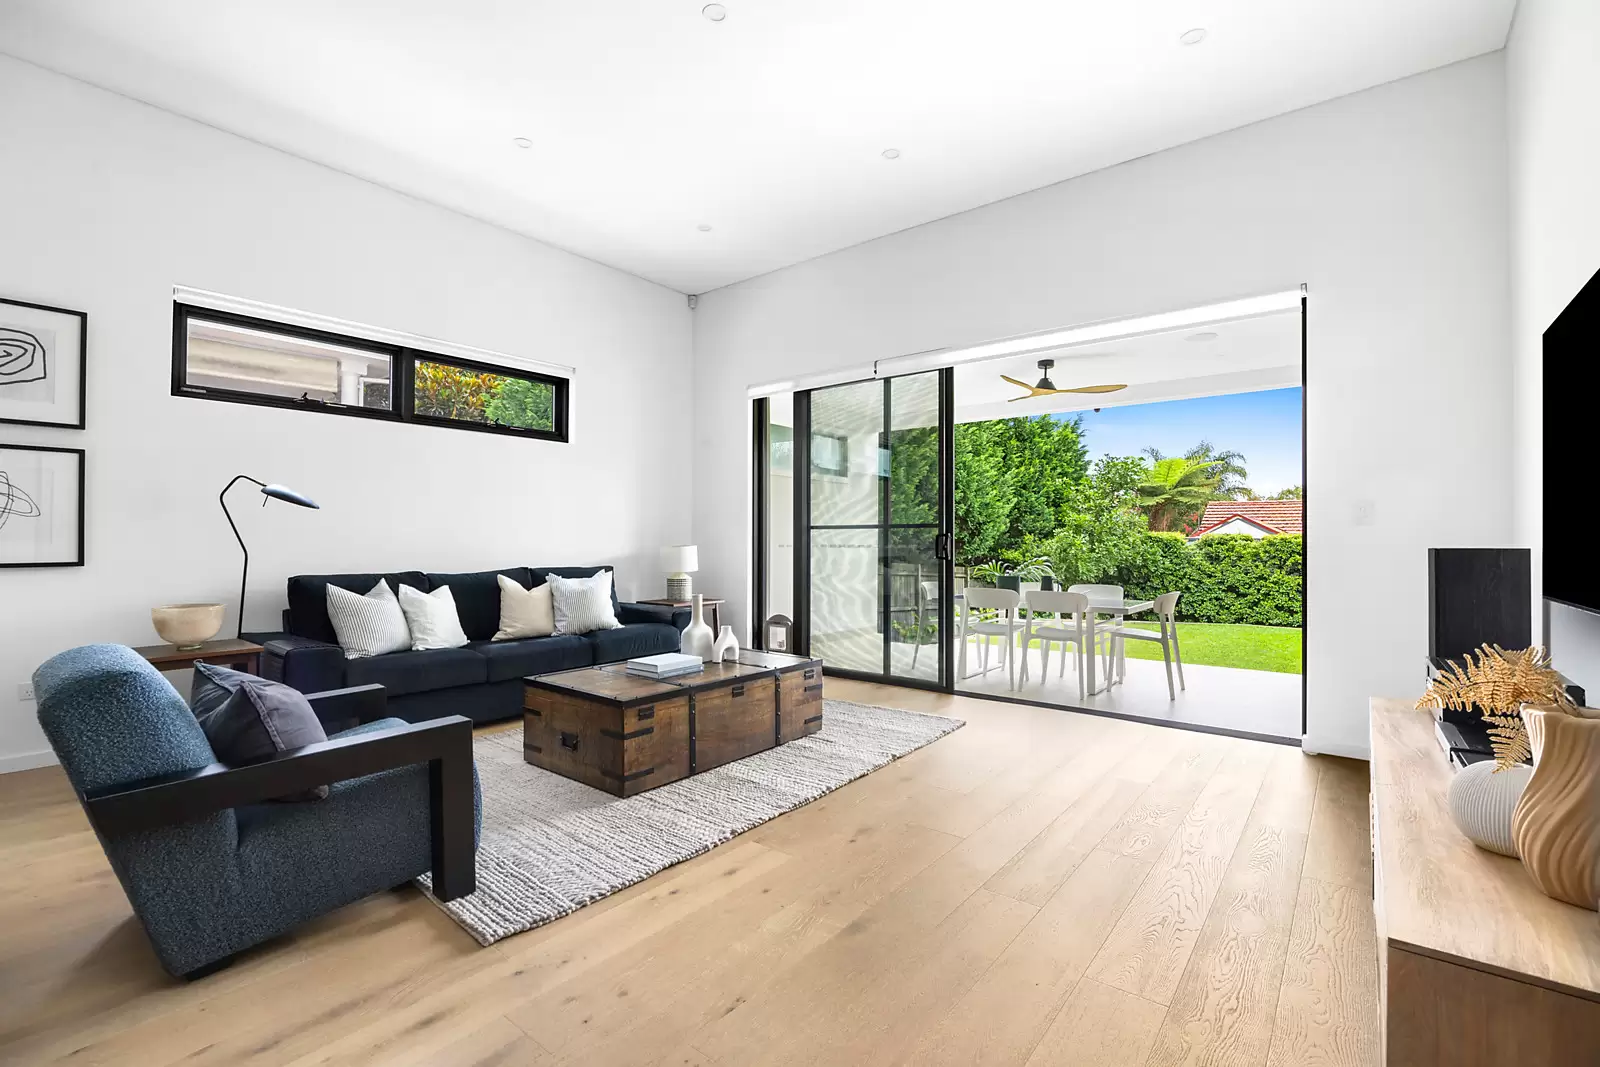 Photo #4: 40a Creer Street, Randwick - Sold by Sydney Sotheby's International Realty